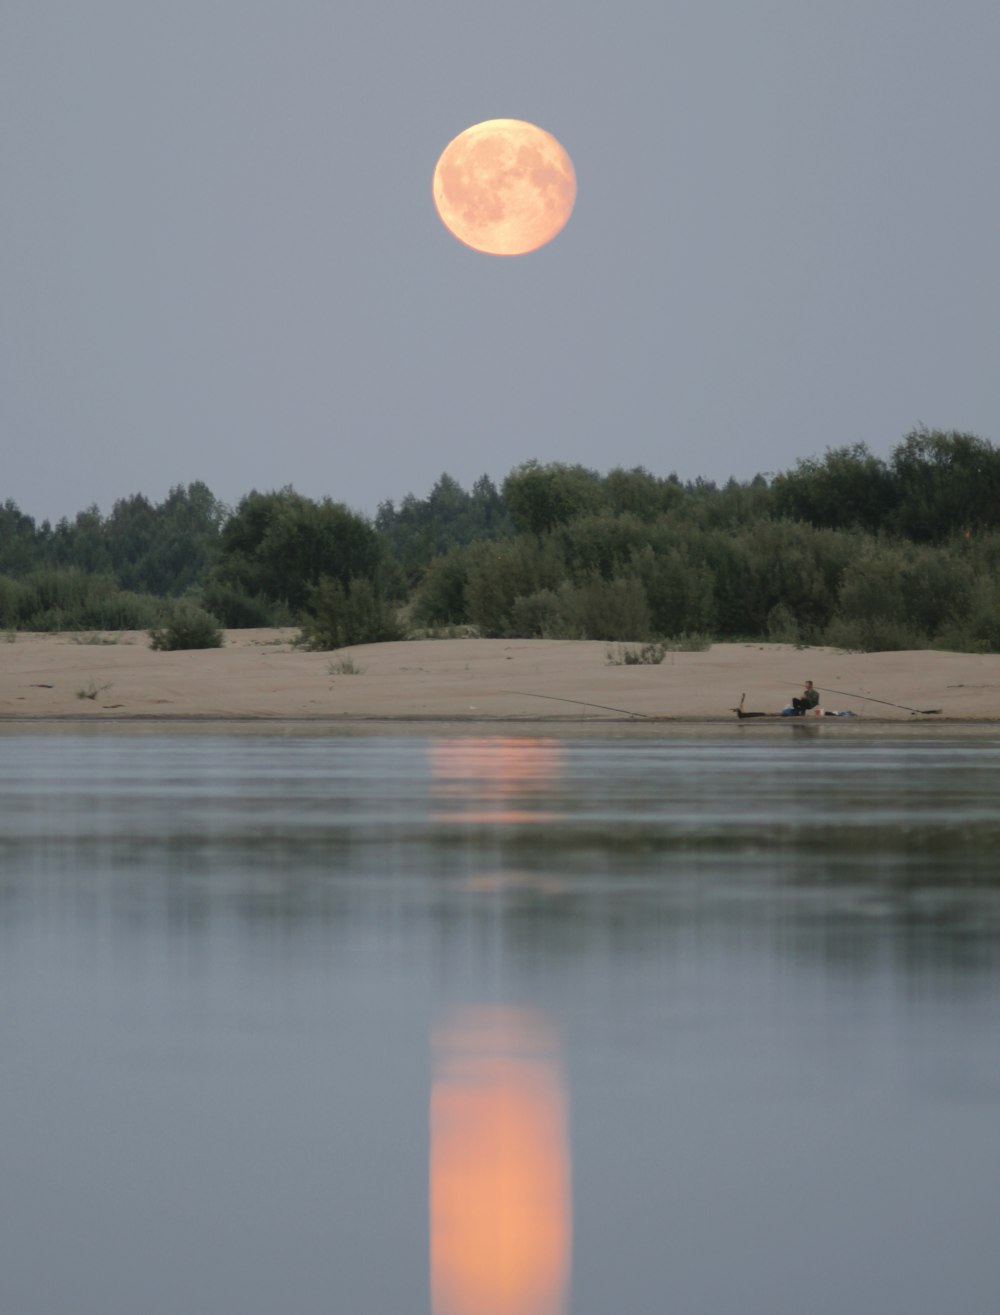 a full moon rising over a body of water